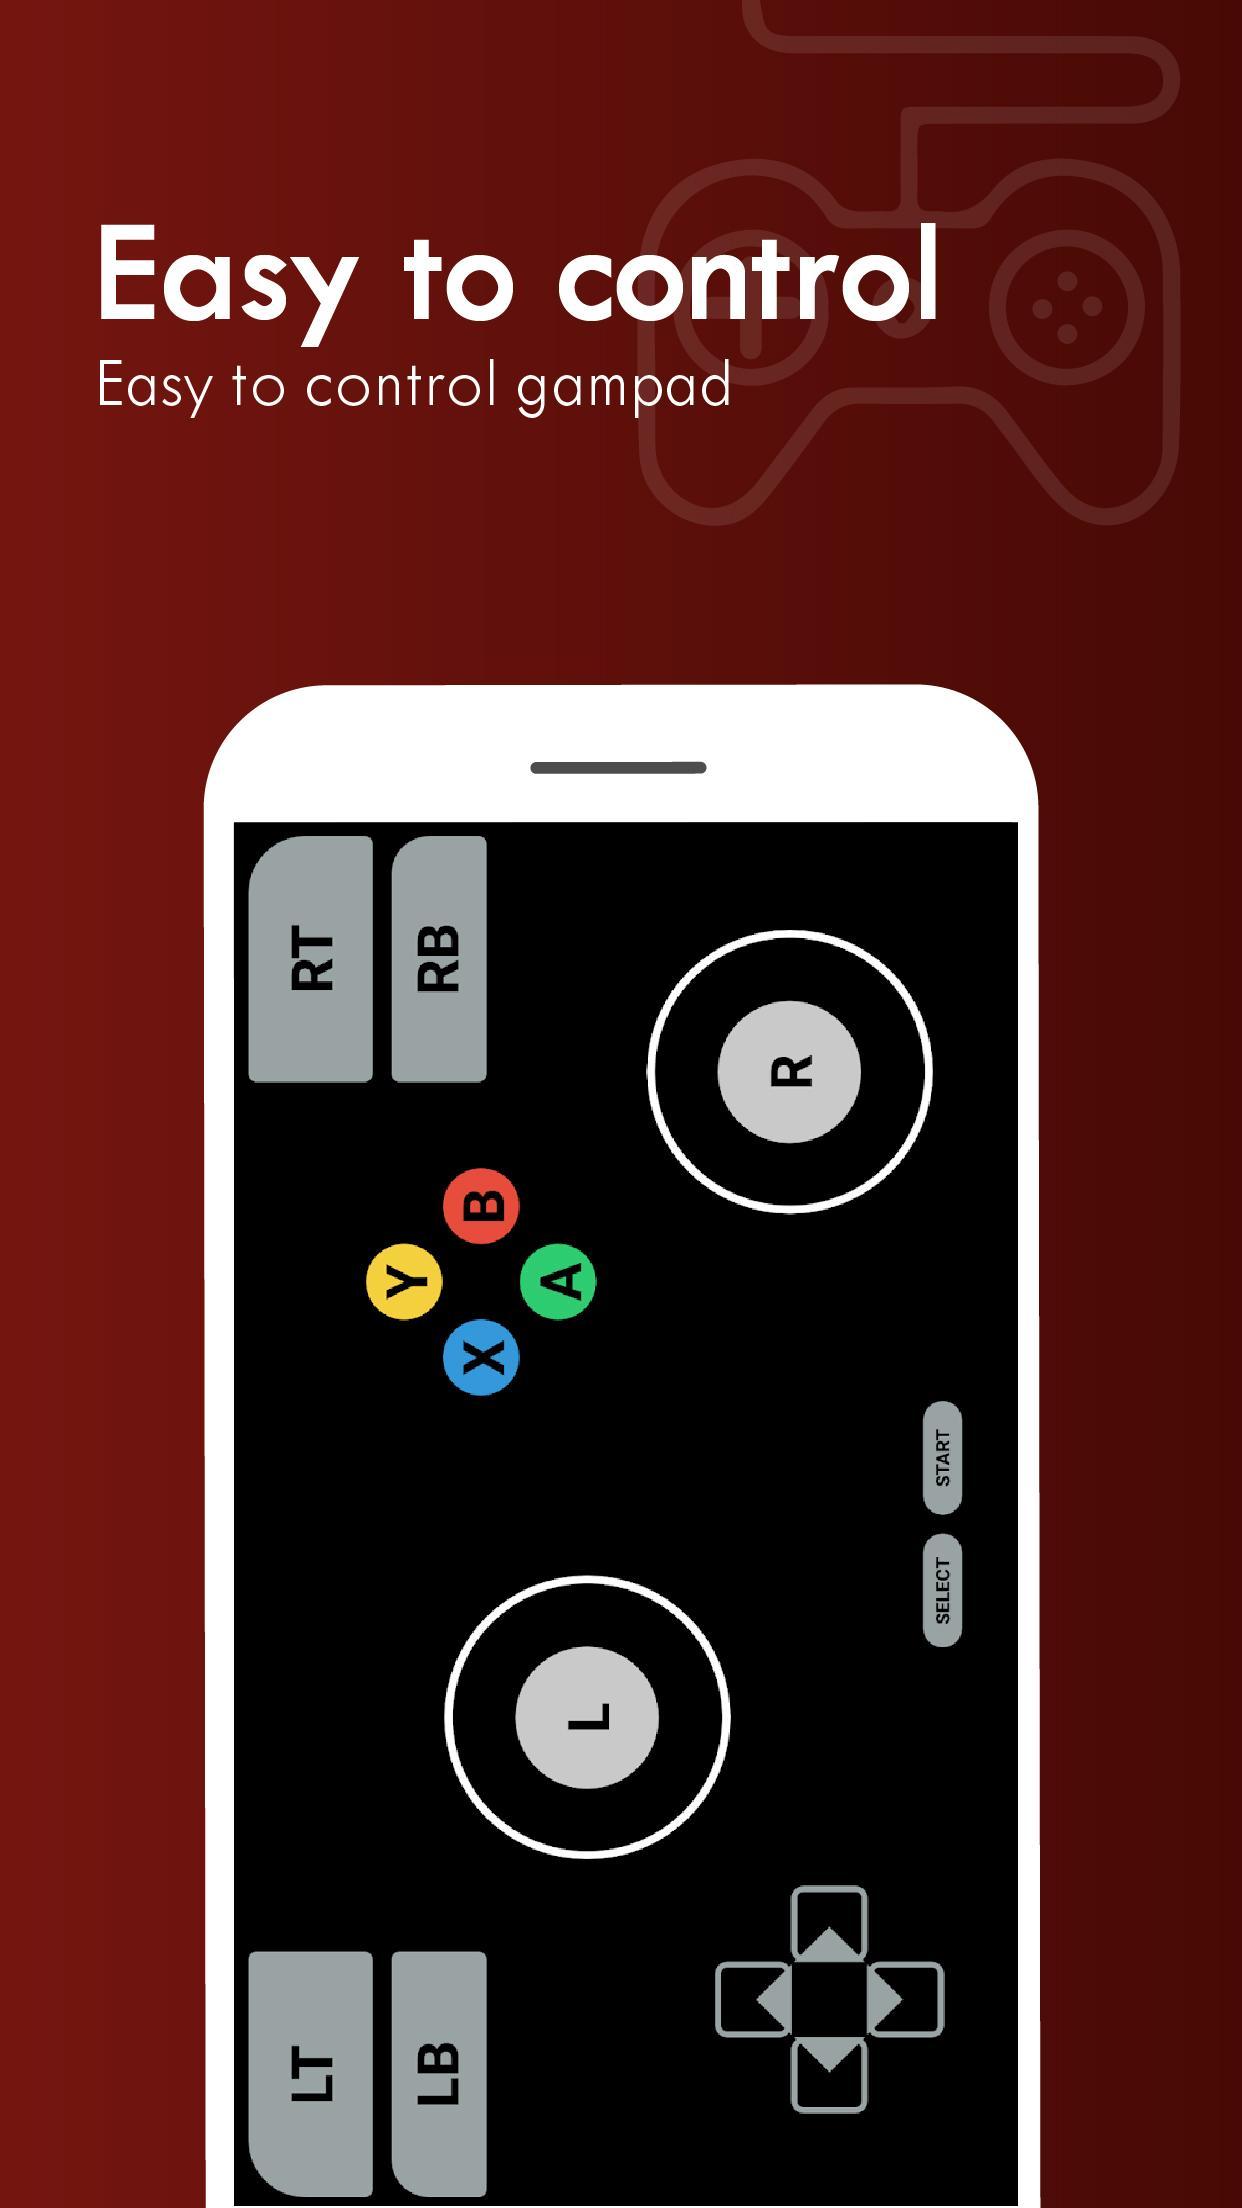 Gamepad Controller for Android for Android - APK Download